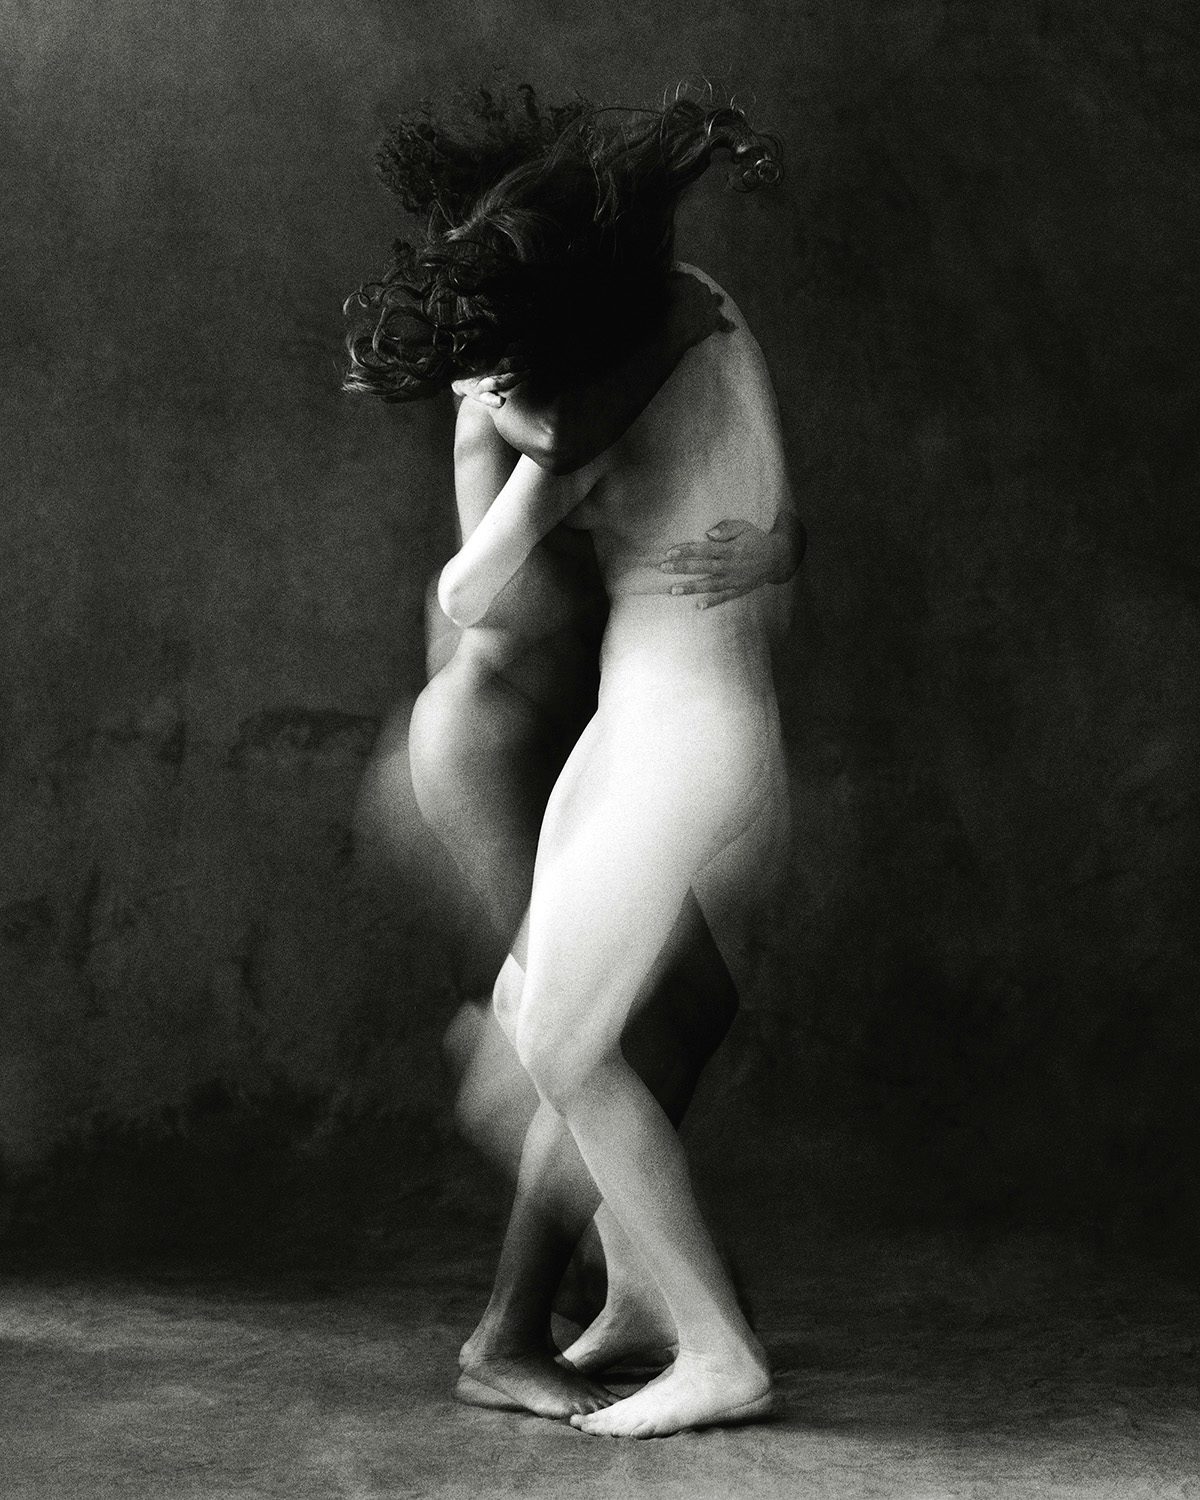 Black and white photograph from O by Luis Alberto Rodriguez, showing two nude bodies embracing one another with blurred effects